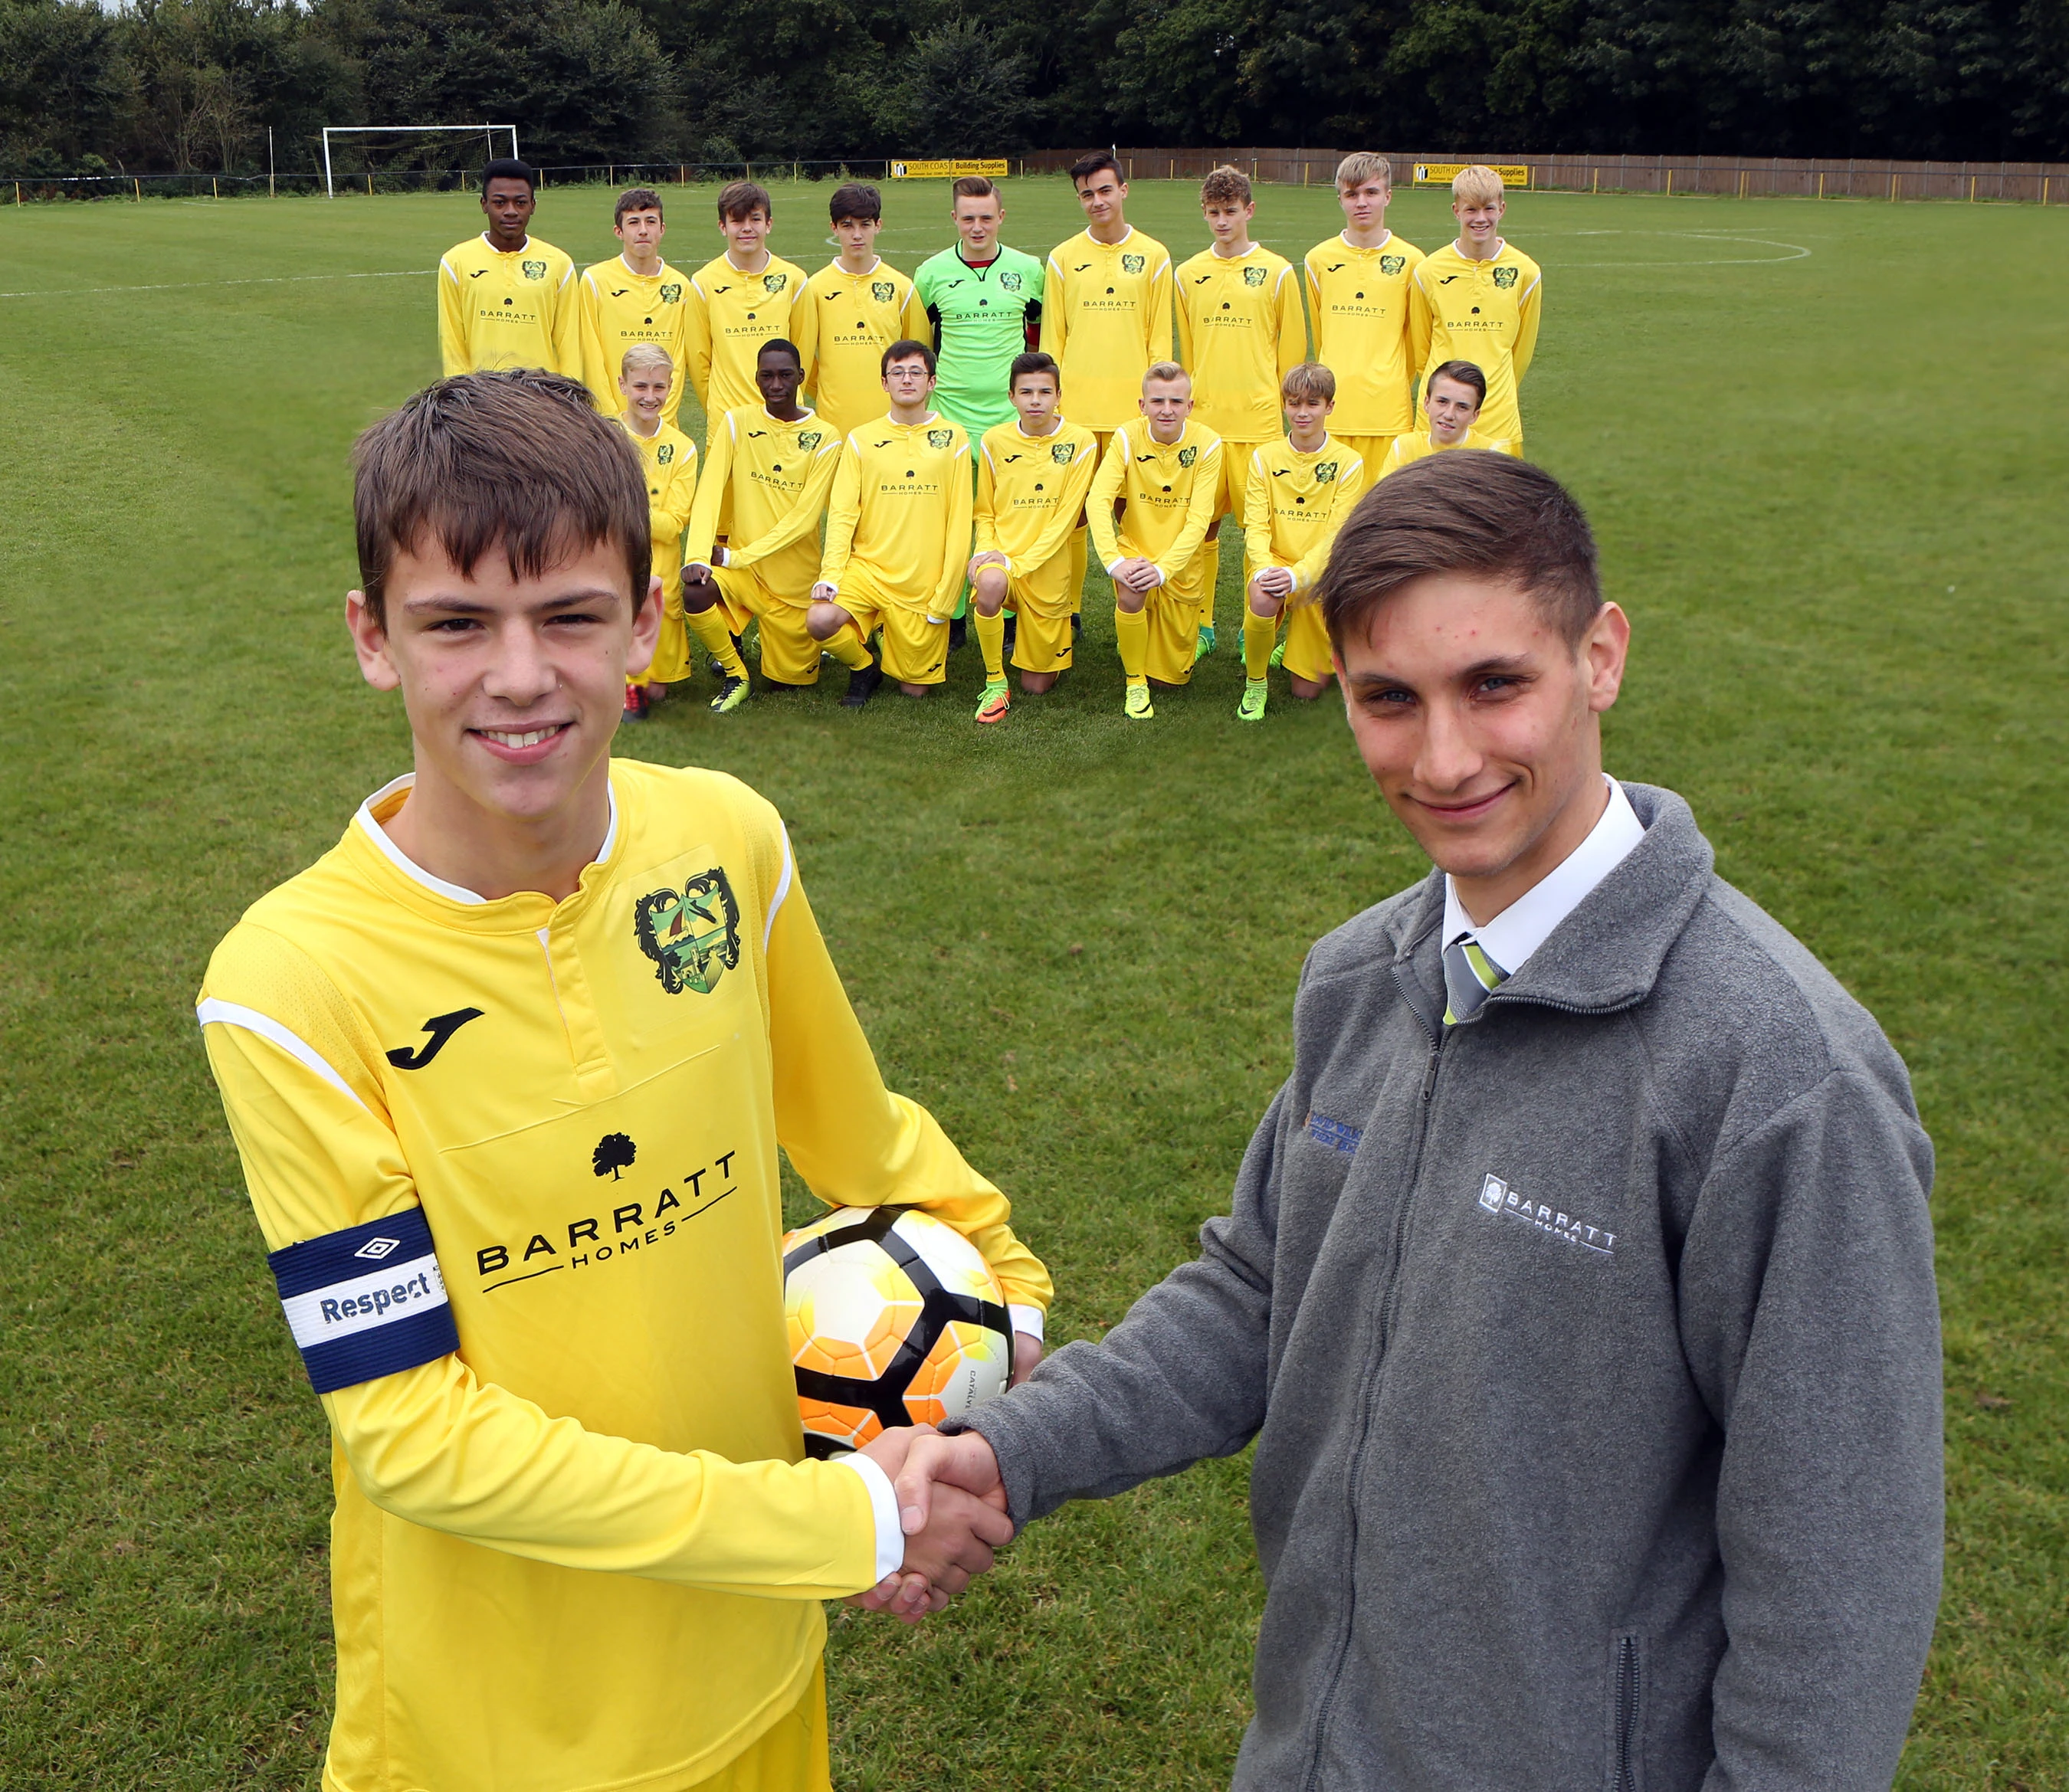 Barratt Homes apprentice Ben Leahy presents the Hamble Colts with their new kit.